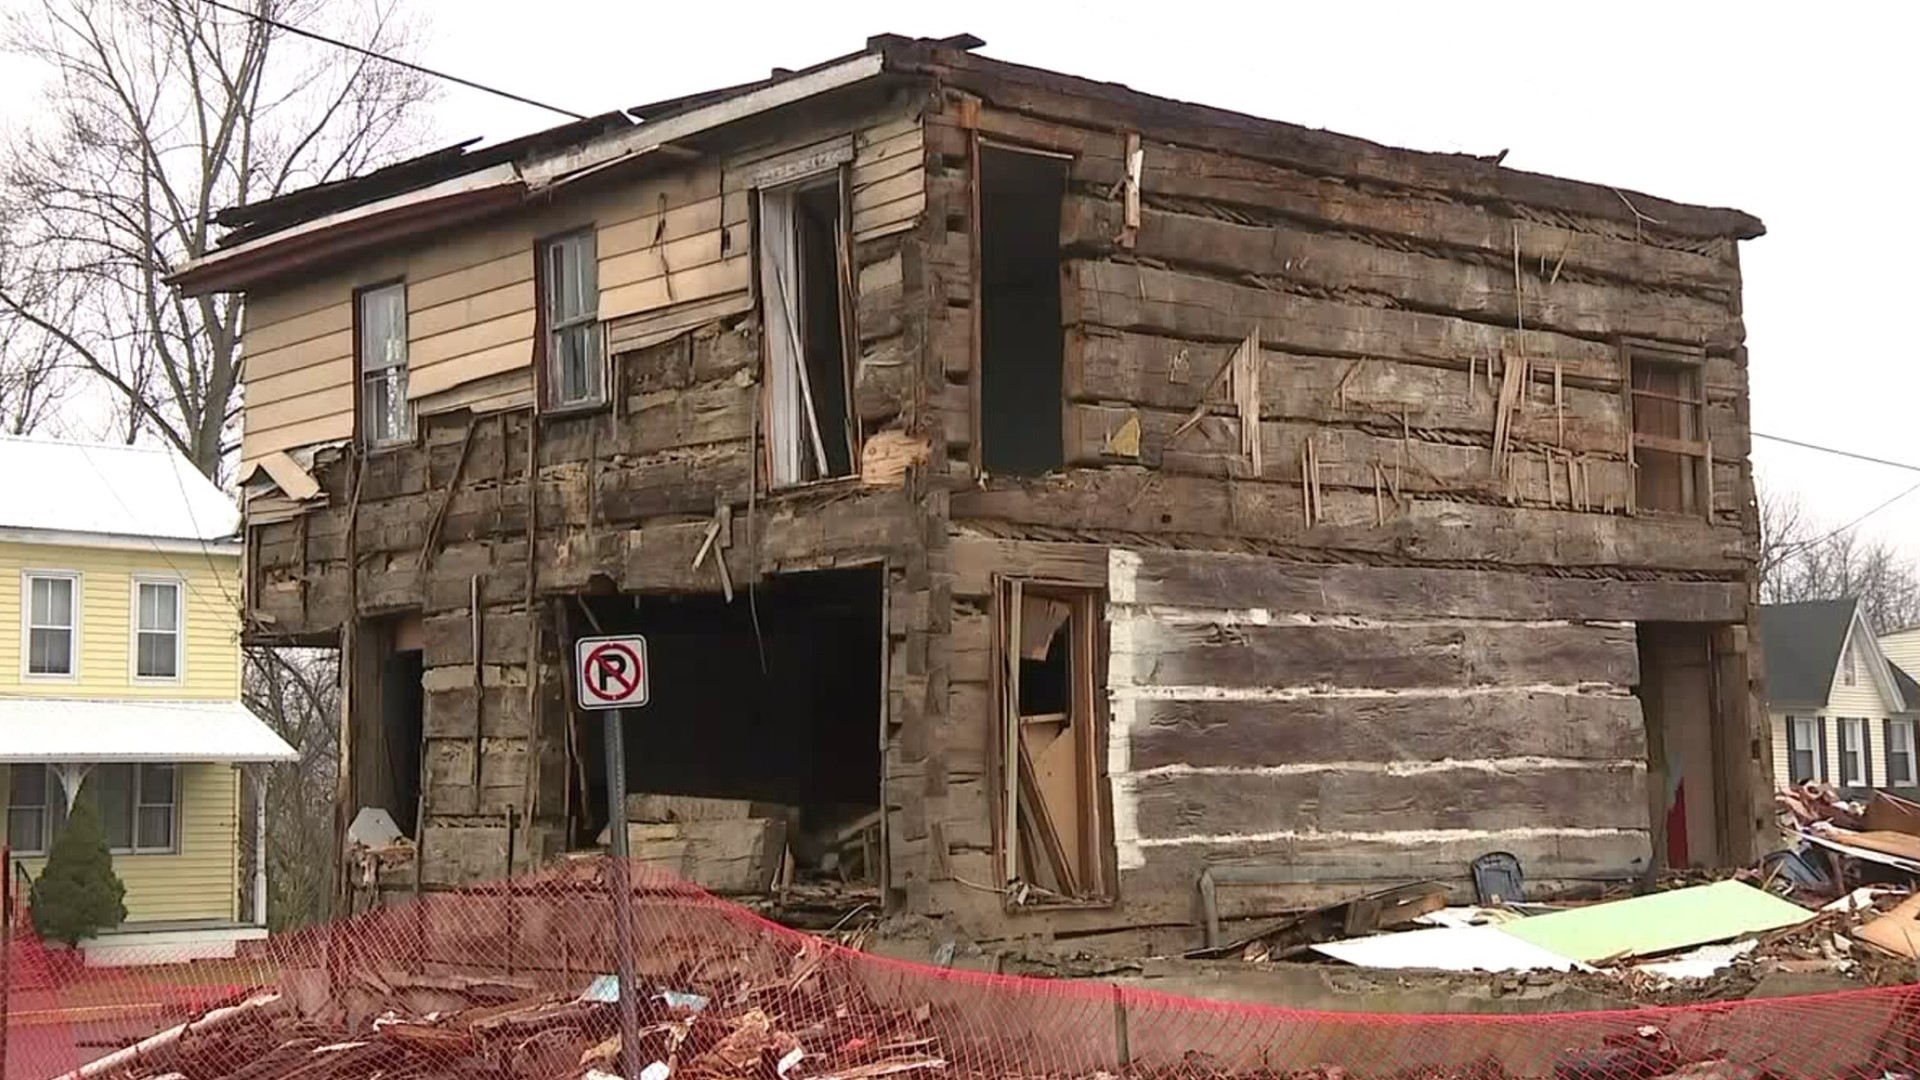 Contractors tearing down a former bar in Montour County got a lot more than they bargained for. They found a log cabin dating back to the 1700s.